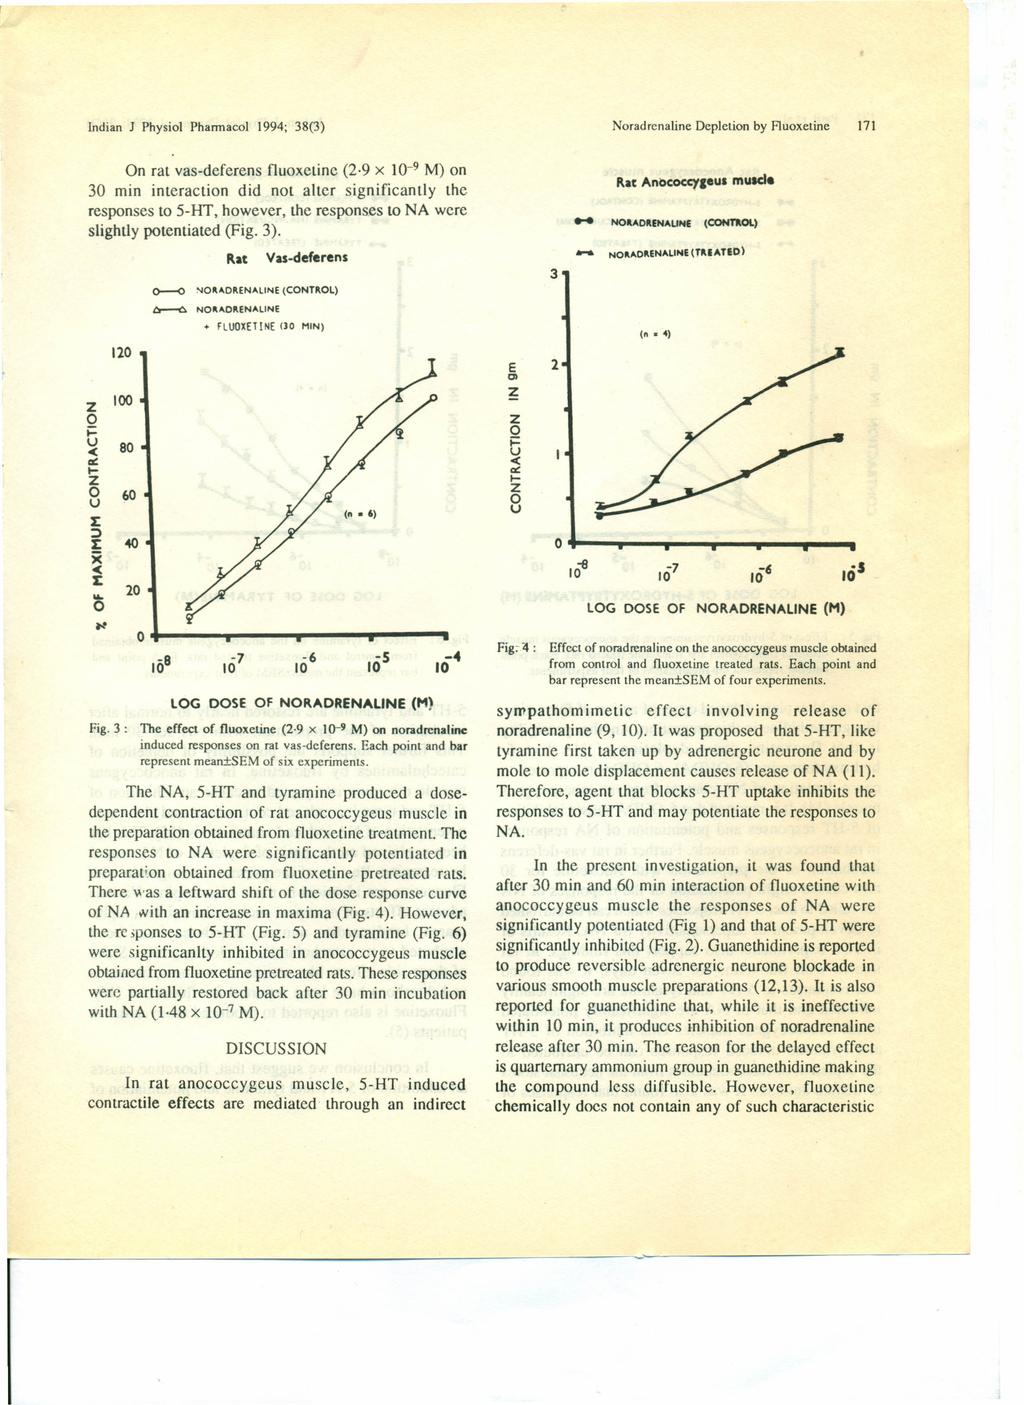 Indian J Physiol Phannacol 1994; 38(3) Noradrenaline Depiction by FIuoxetine 171 On rat vas-deferens fluoxetine (2 9 x 1-9 M) on 3 min interaction did not alter significantly the responses to 5-HT,